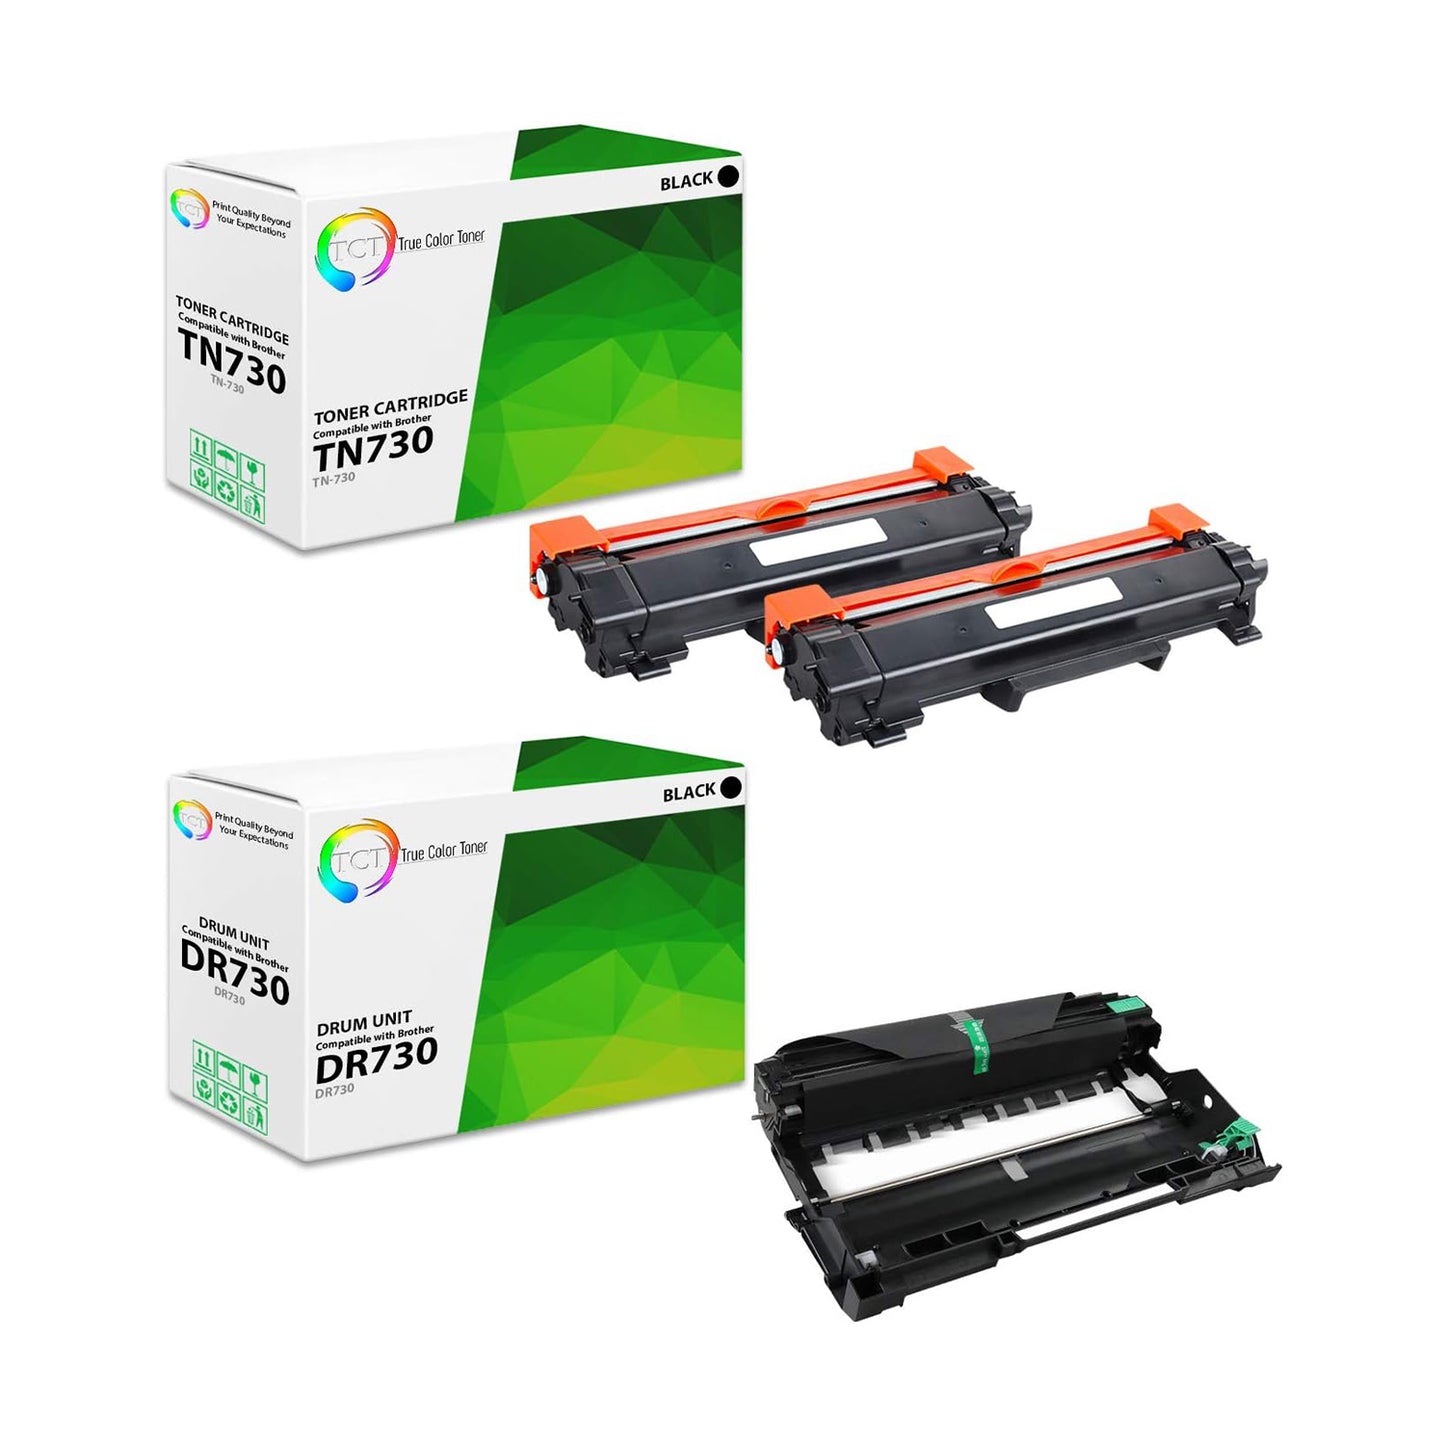 TCT Compatible Toner Cartridge and Drum Replacement for the Brother TN730 DR730 Series - 3 Pack